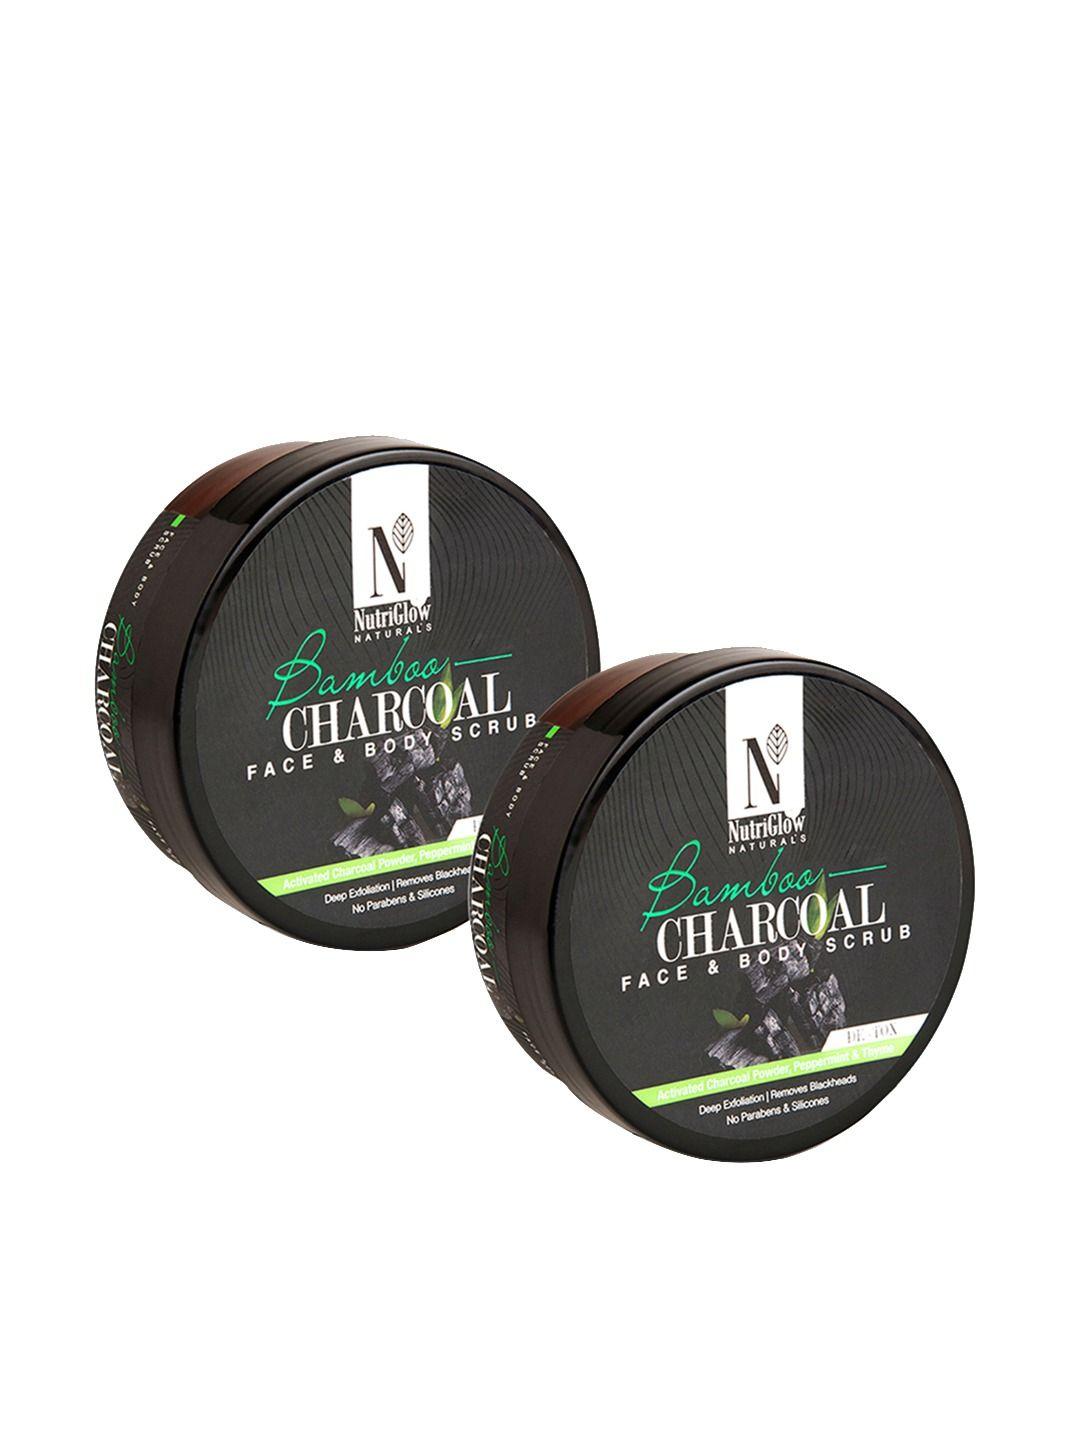 nutriglow naturals set of 2 bamboo charcoal face & body scrub 200 g each